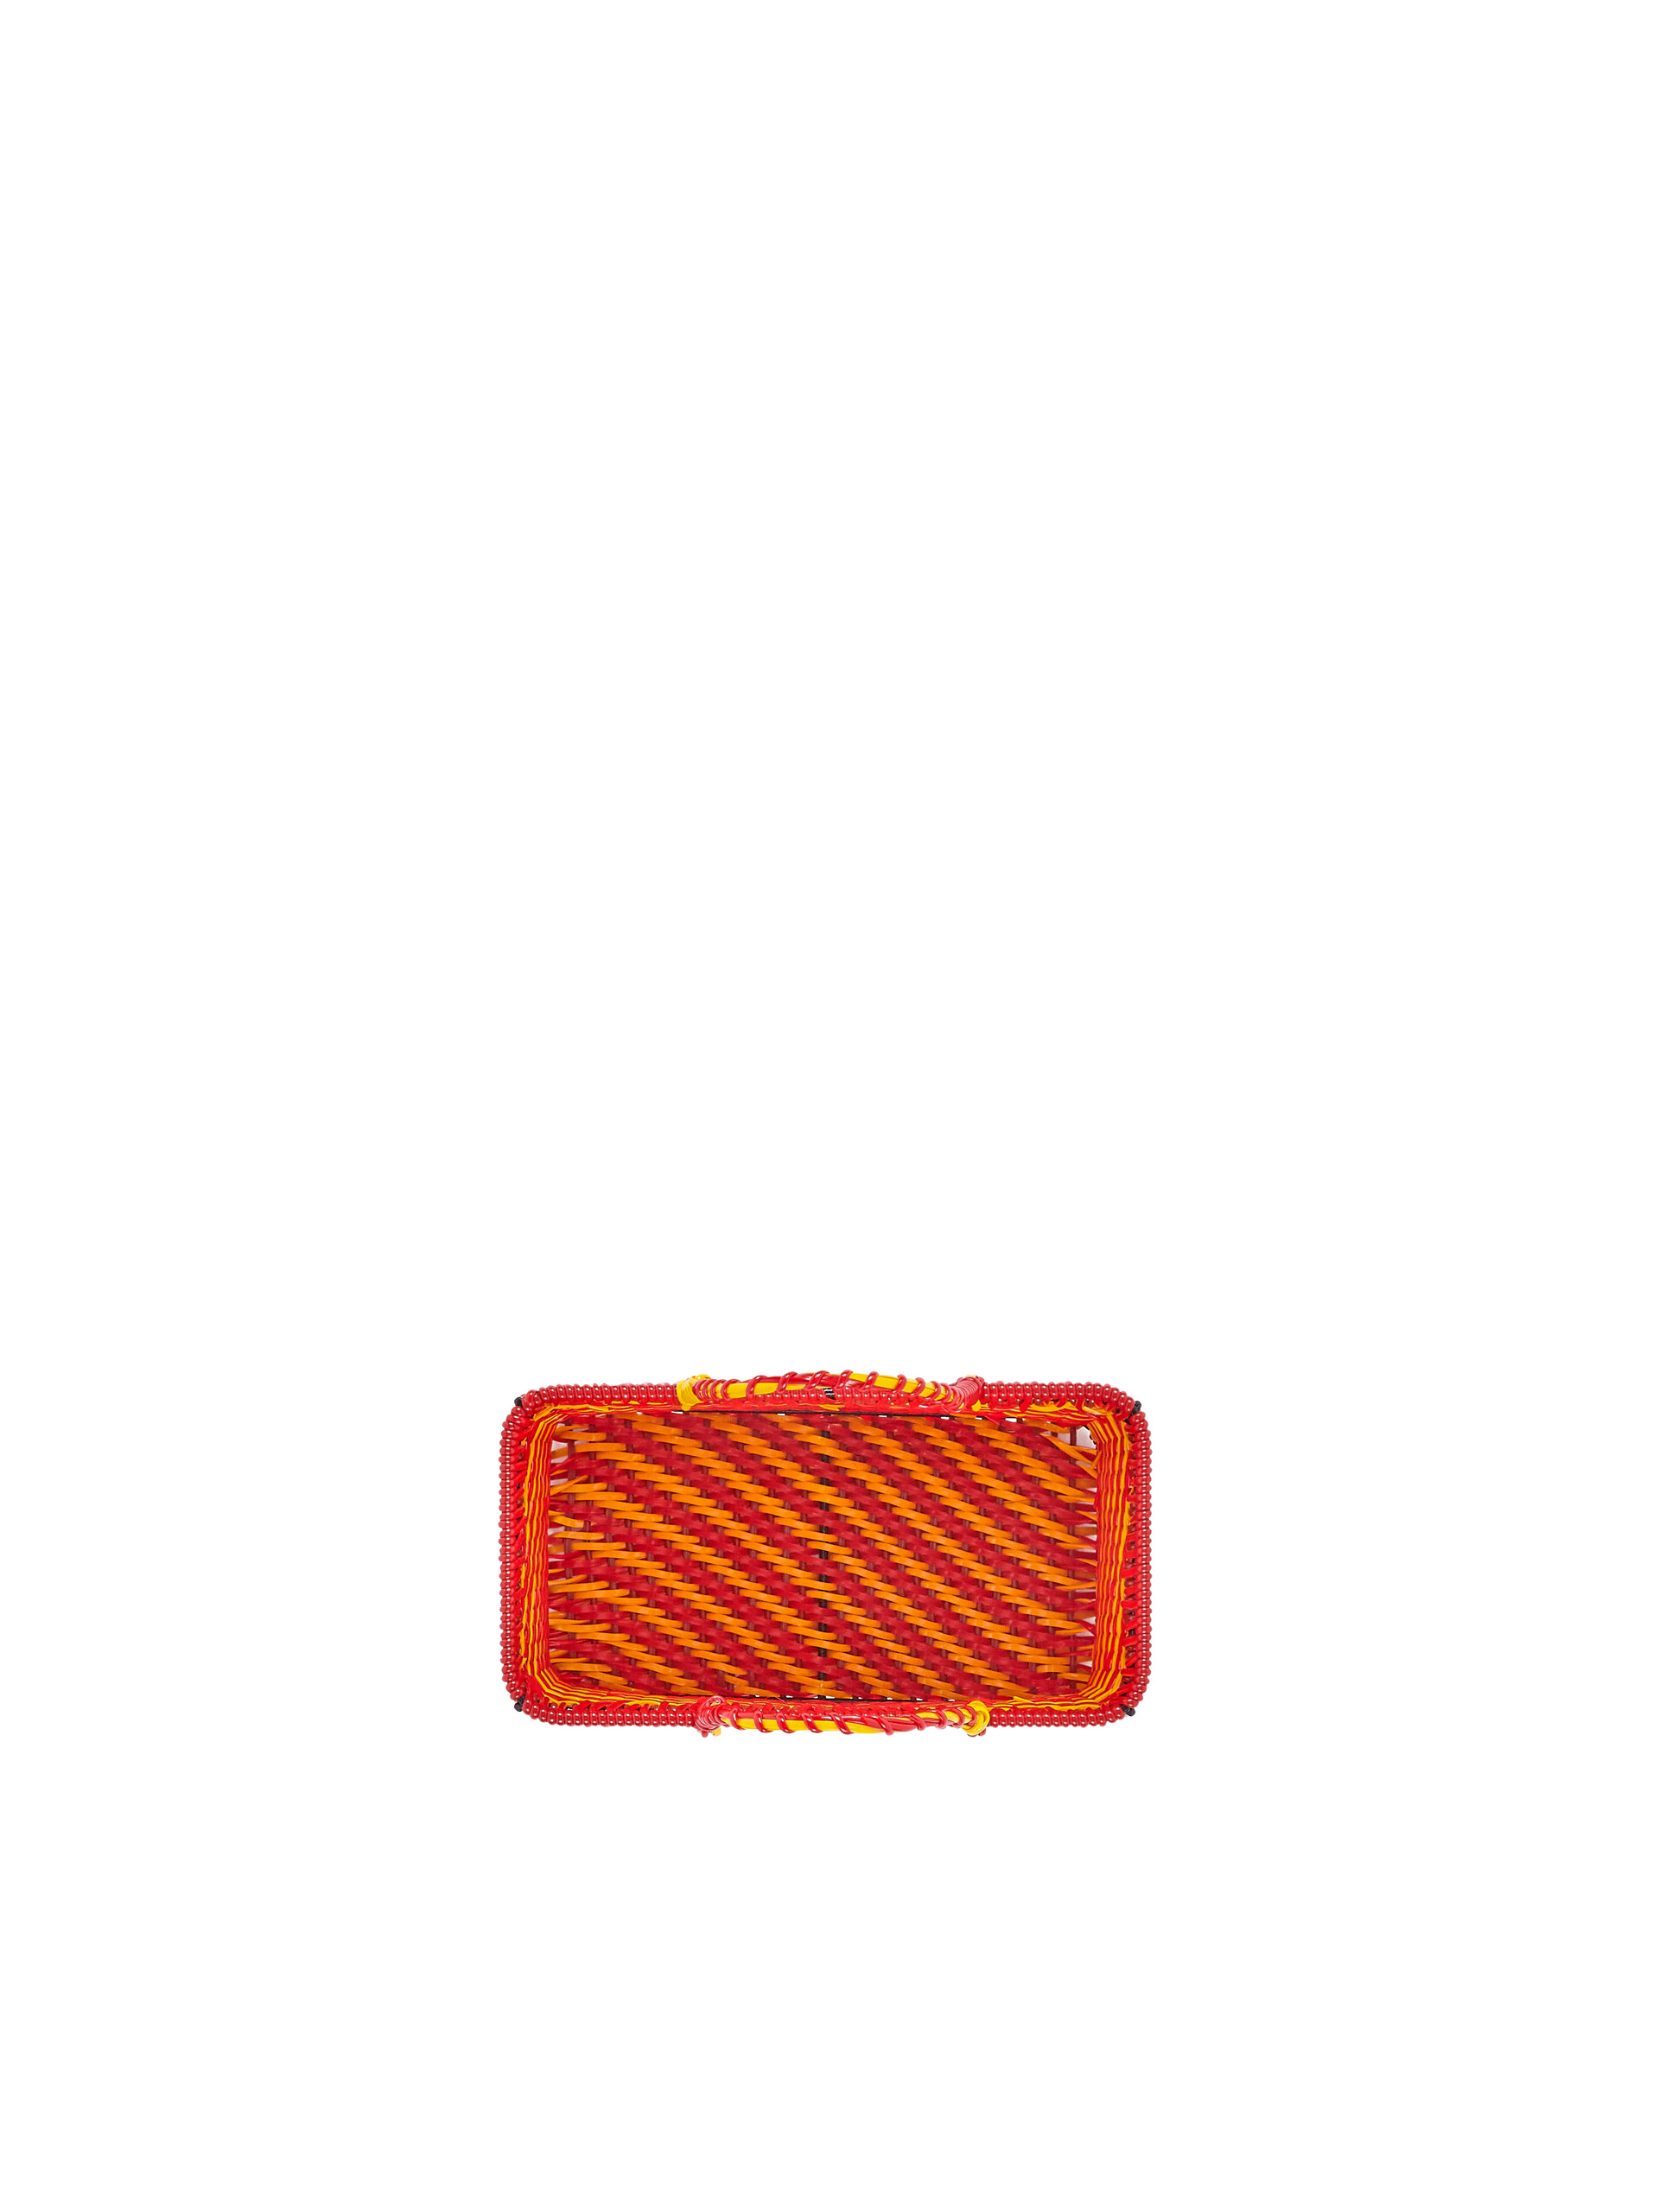 MARNI MARKET basket in iron and orange and red PVC - Home Accessories - Image 4